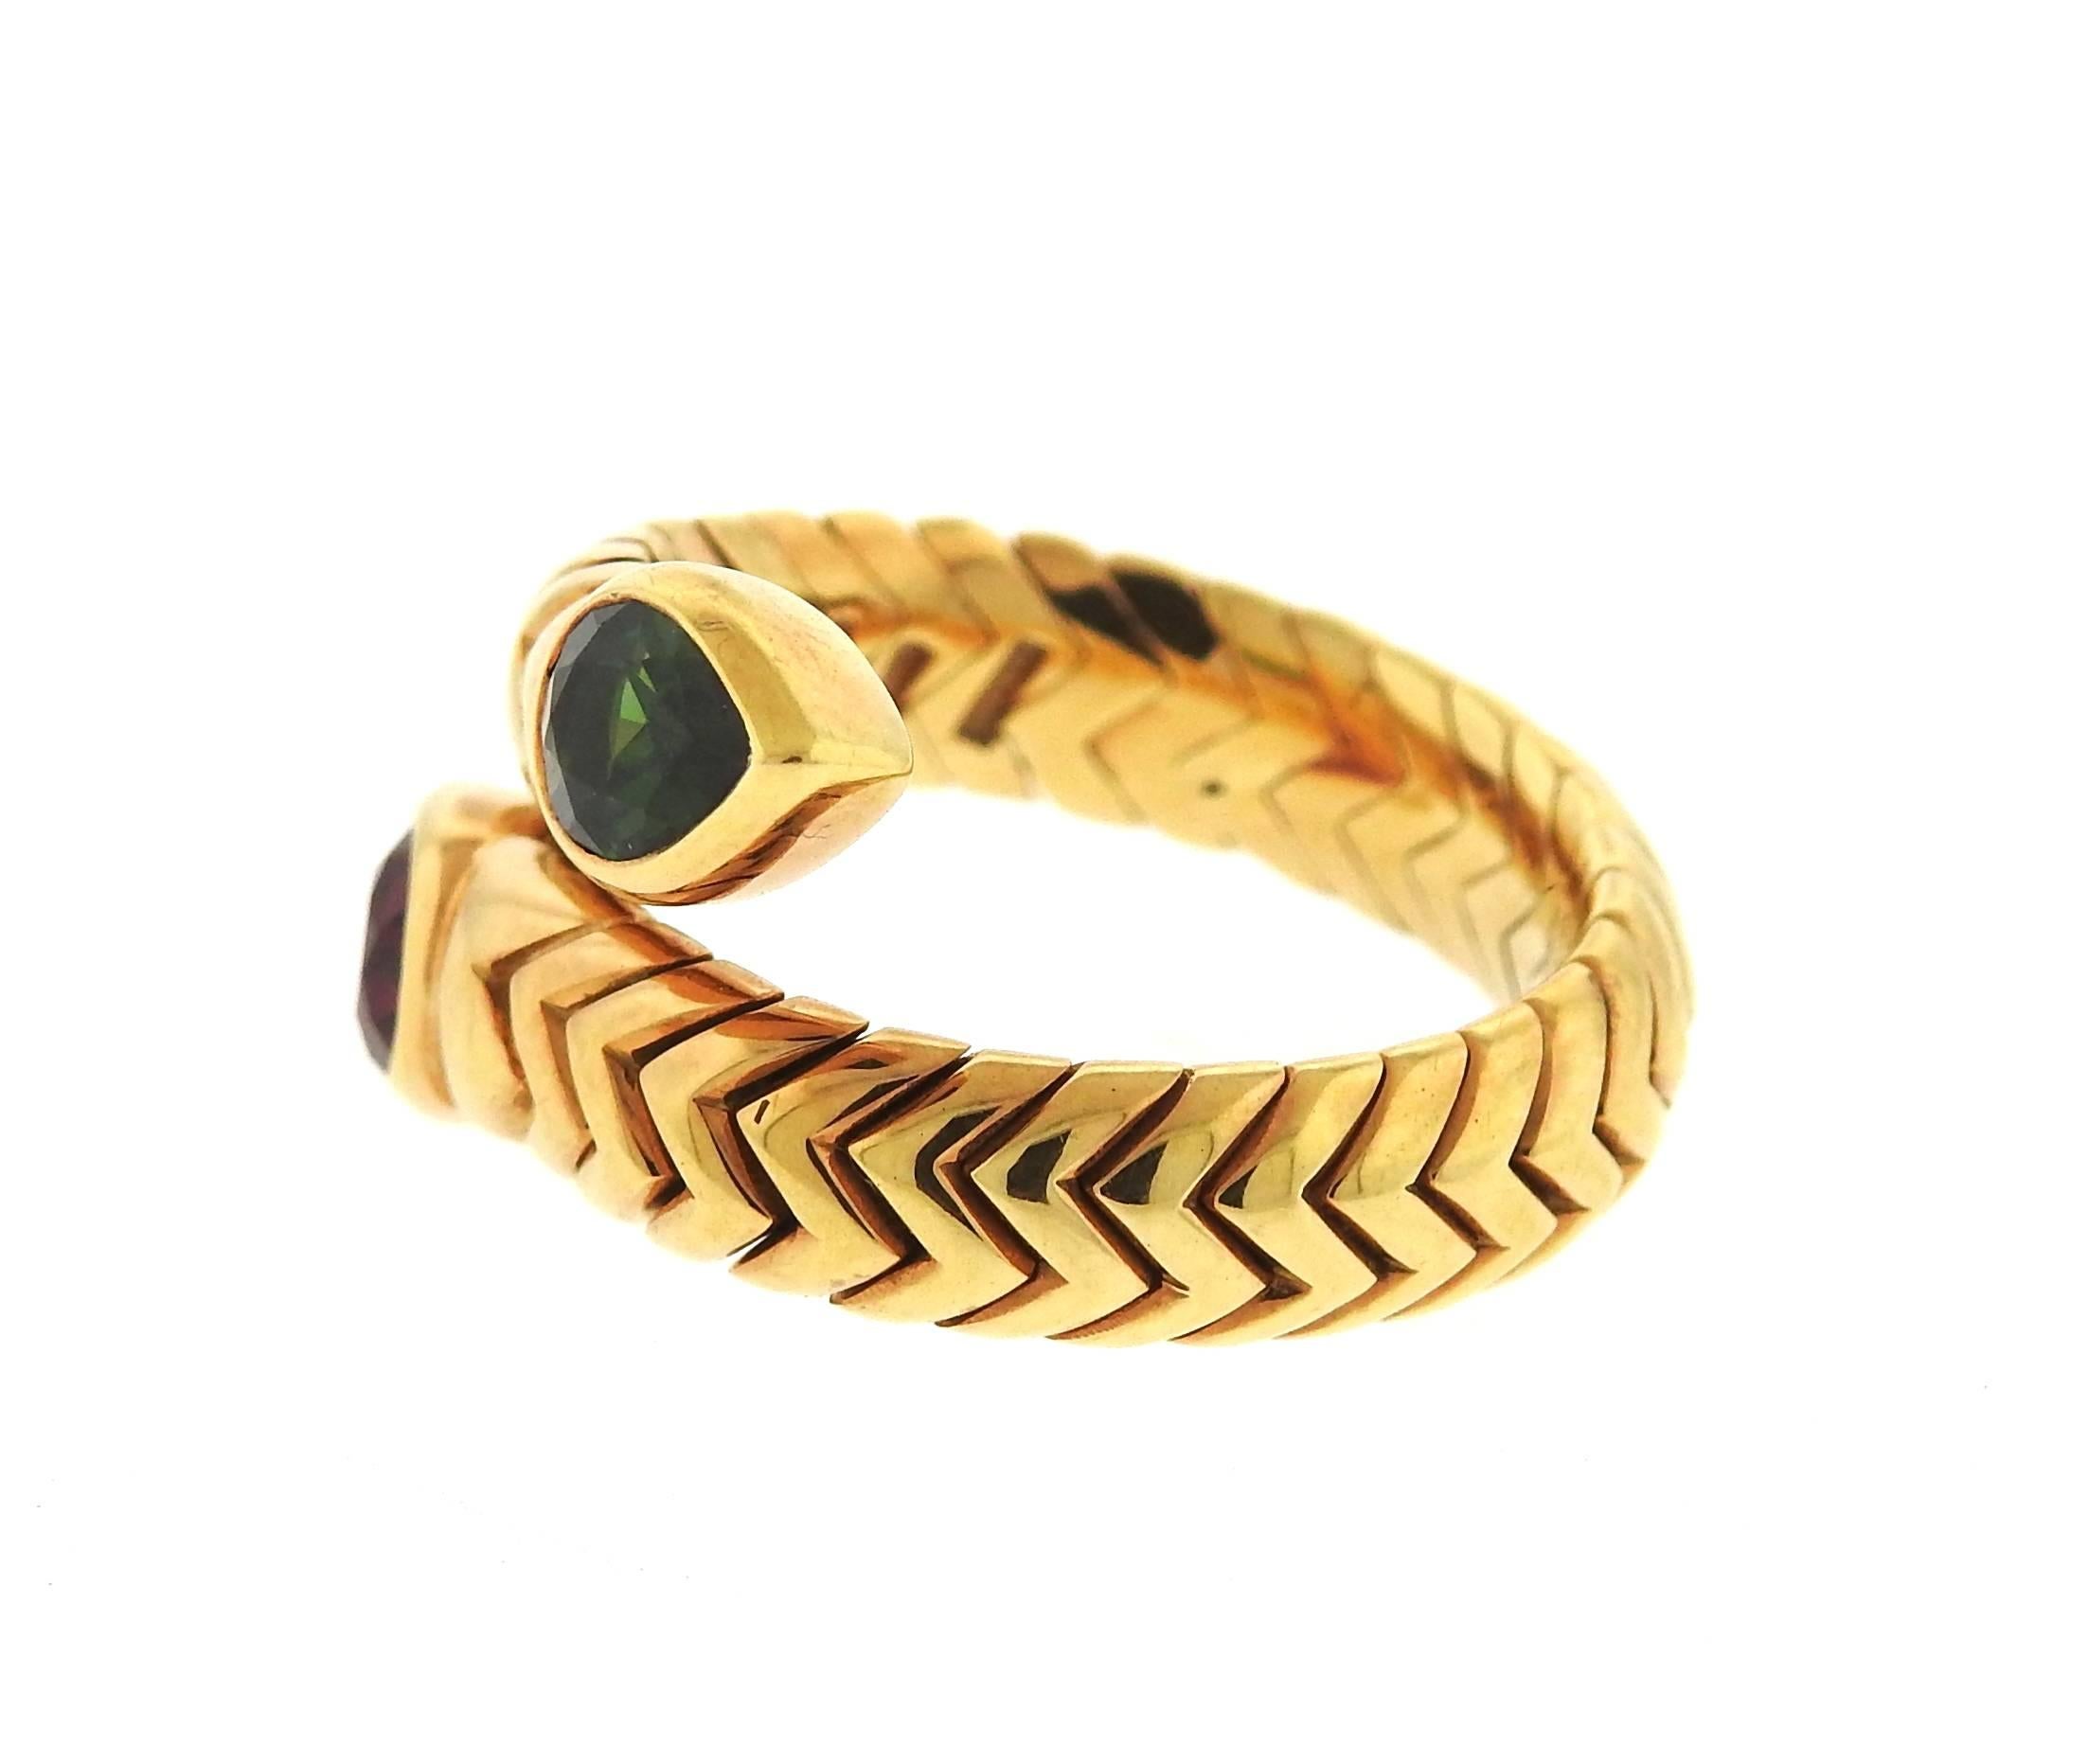 An 18K yellow gold ring set with a ruby and green tourmaline. The ring is a size 7 (slightly flexible due to construction of the ring) and is 14mm wide.  Marked: Bvlgari, 750, Italian marks.  The weight of the piece is 11.6 grams.